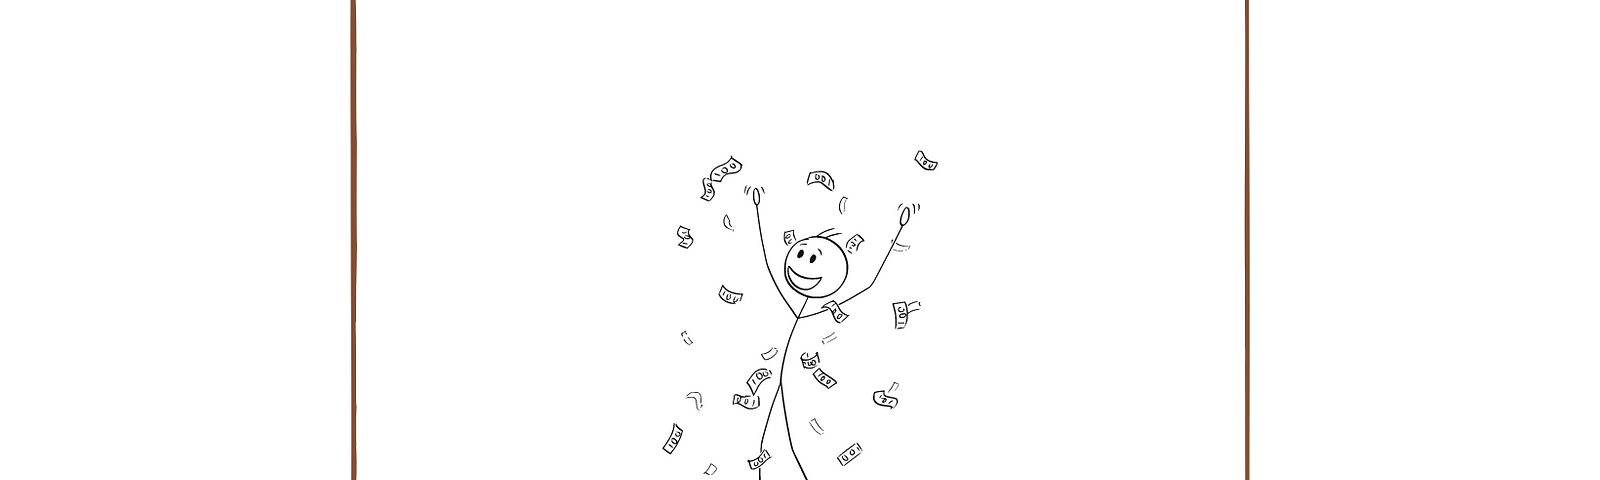 A stick figure throwing cash and making it rain